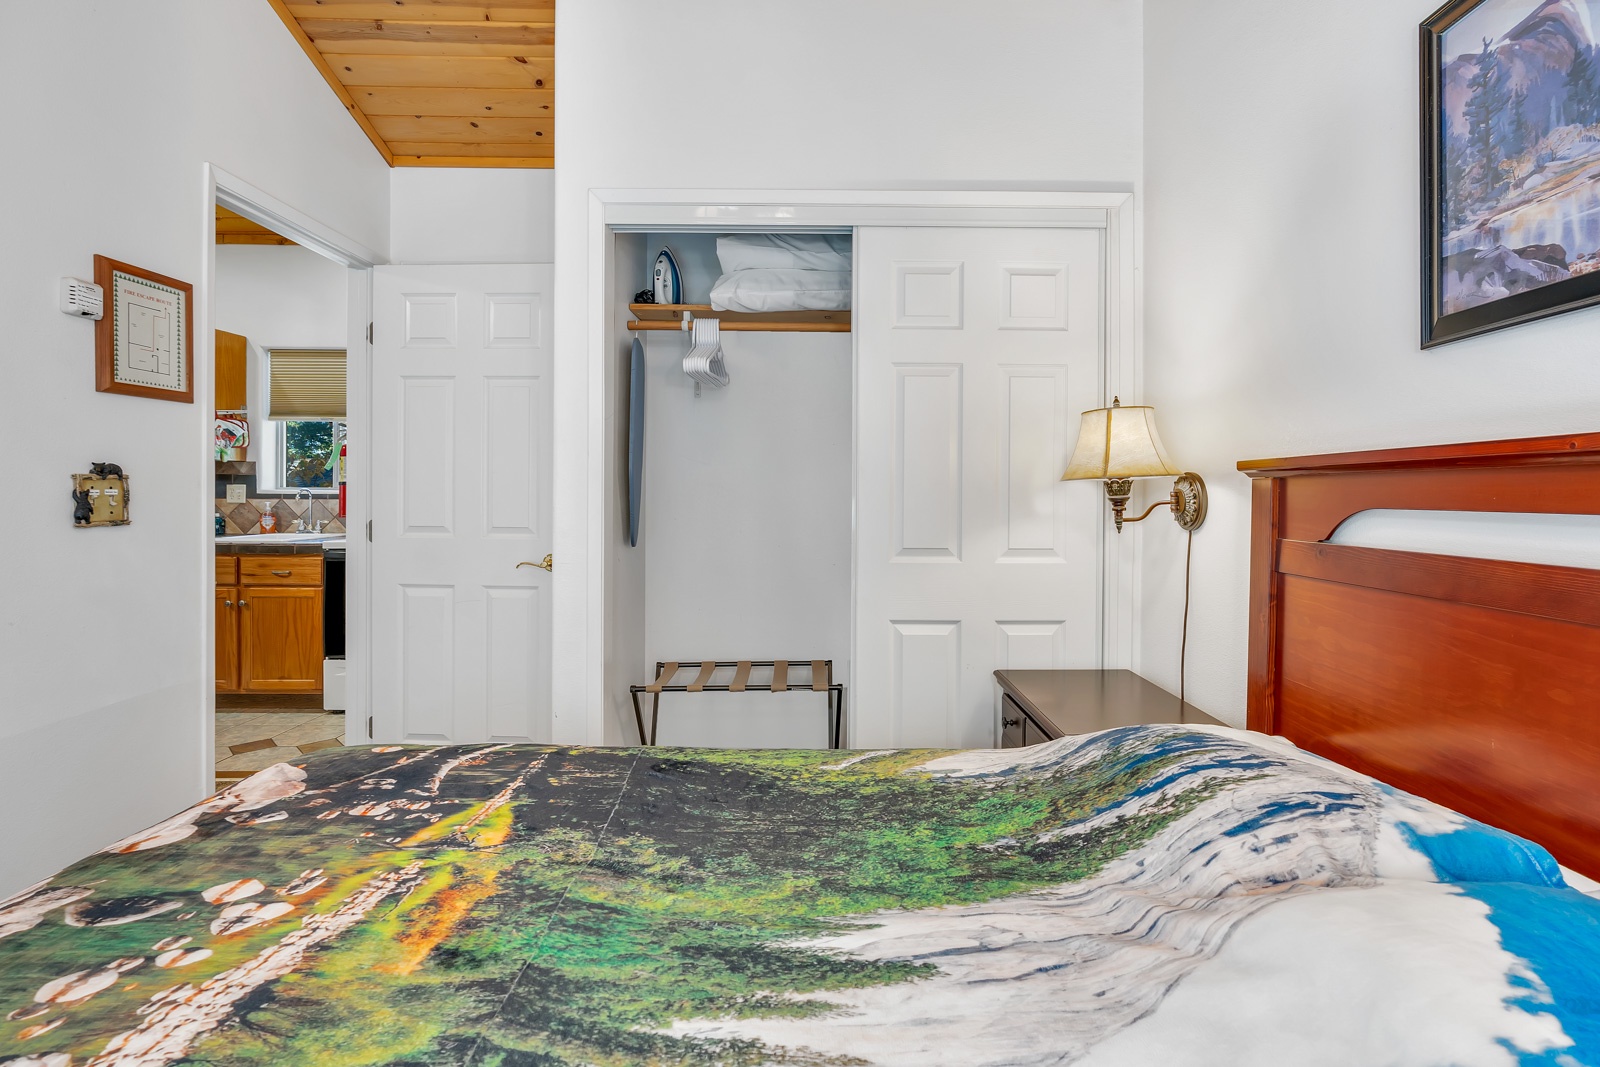 The private bedroom offers soaring ceilings & a regal queen-sized bed